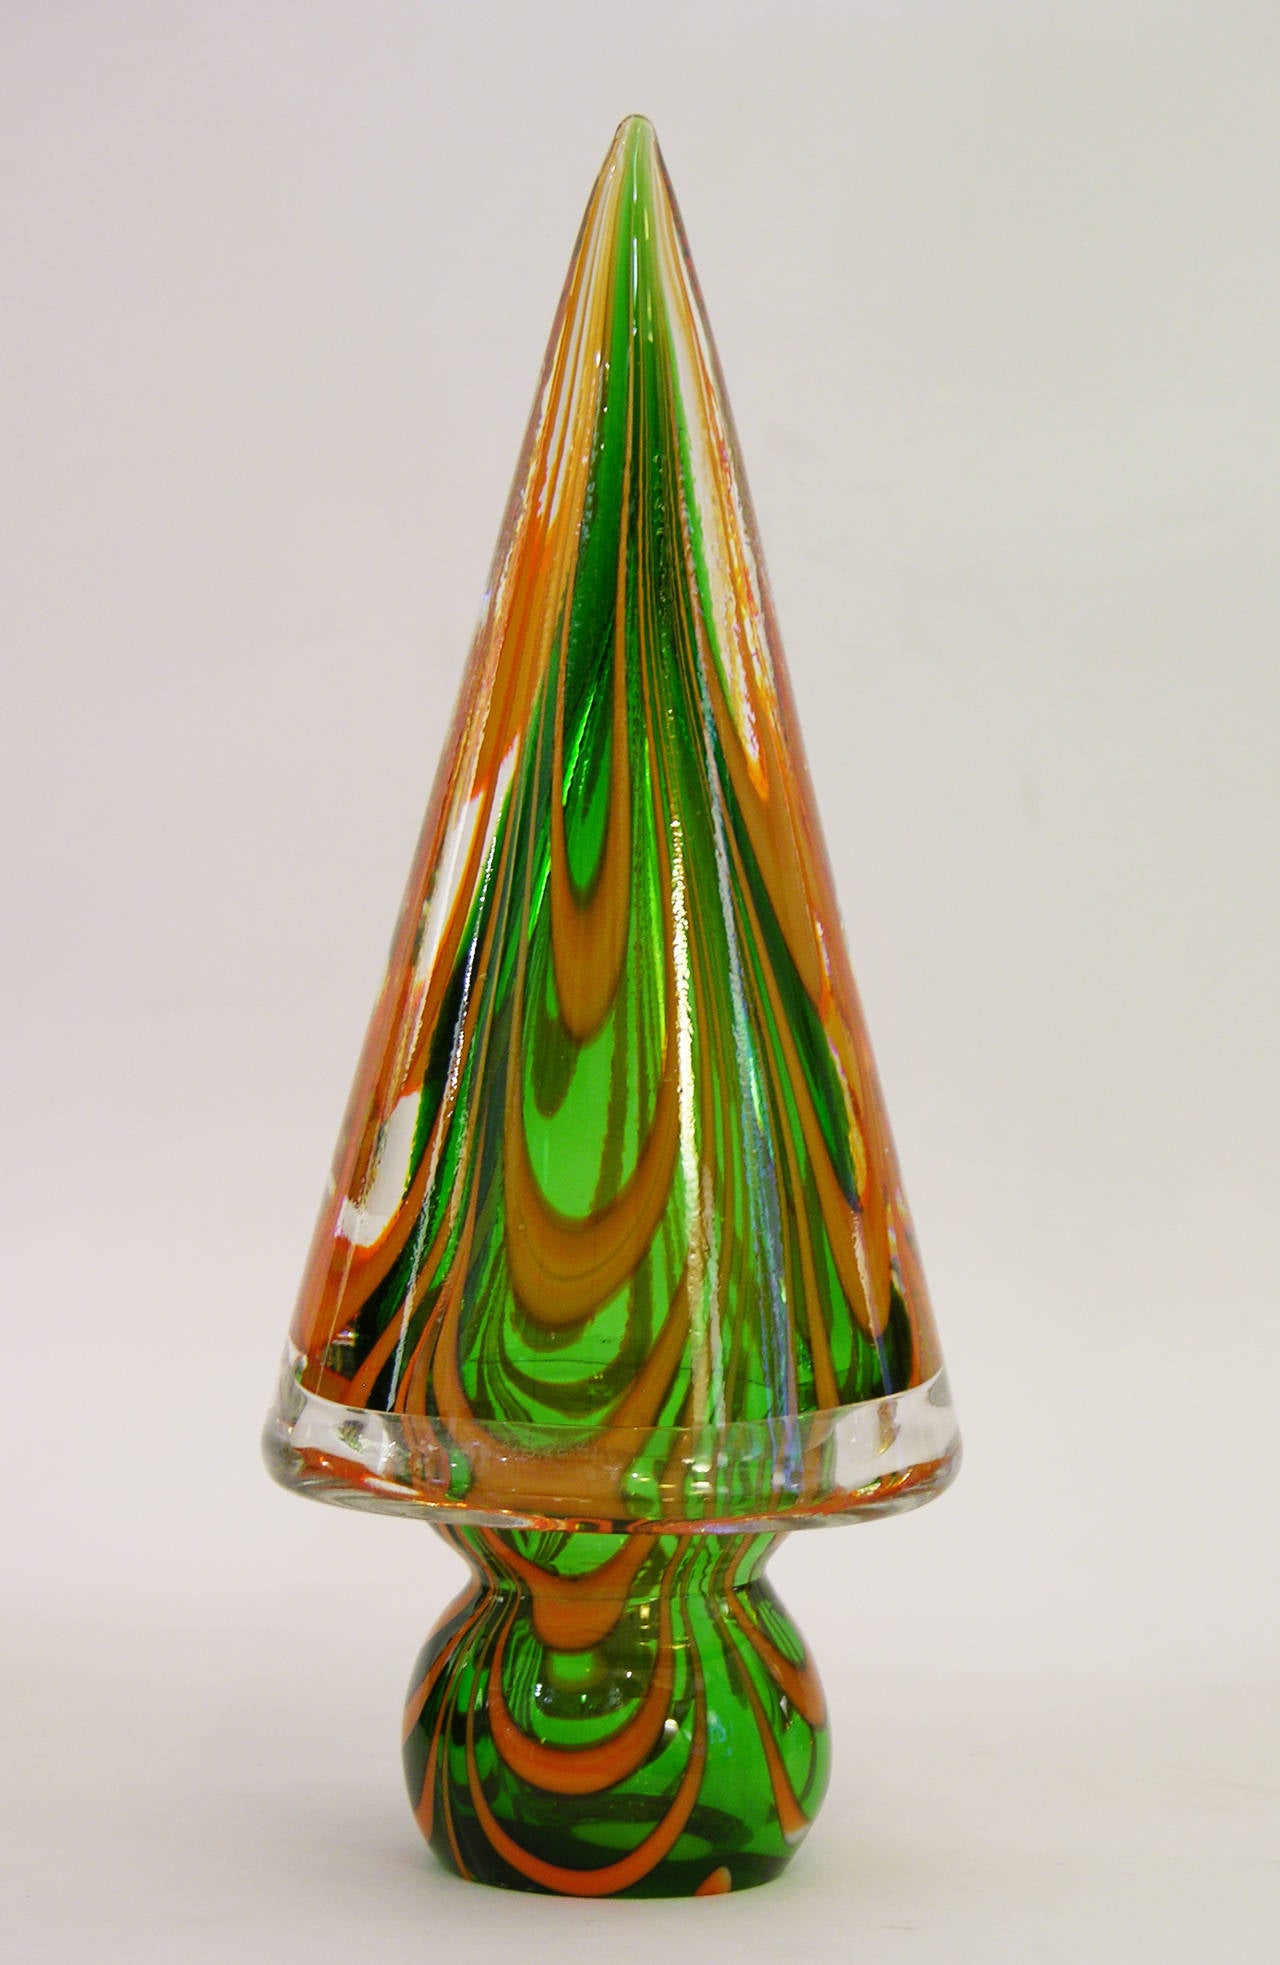 These colorful Christmas Trees are each individually blown and a creation by the Venetian company Formia, in mouth blown Murano Glass. Some are worked with pure gold, some with inclamo and silver speckles, with colored swirls in the glass. With